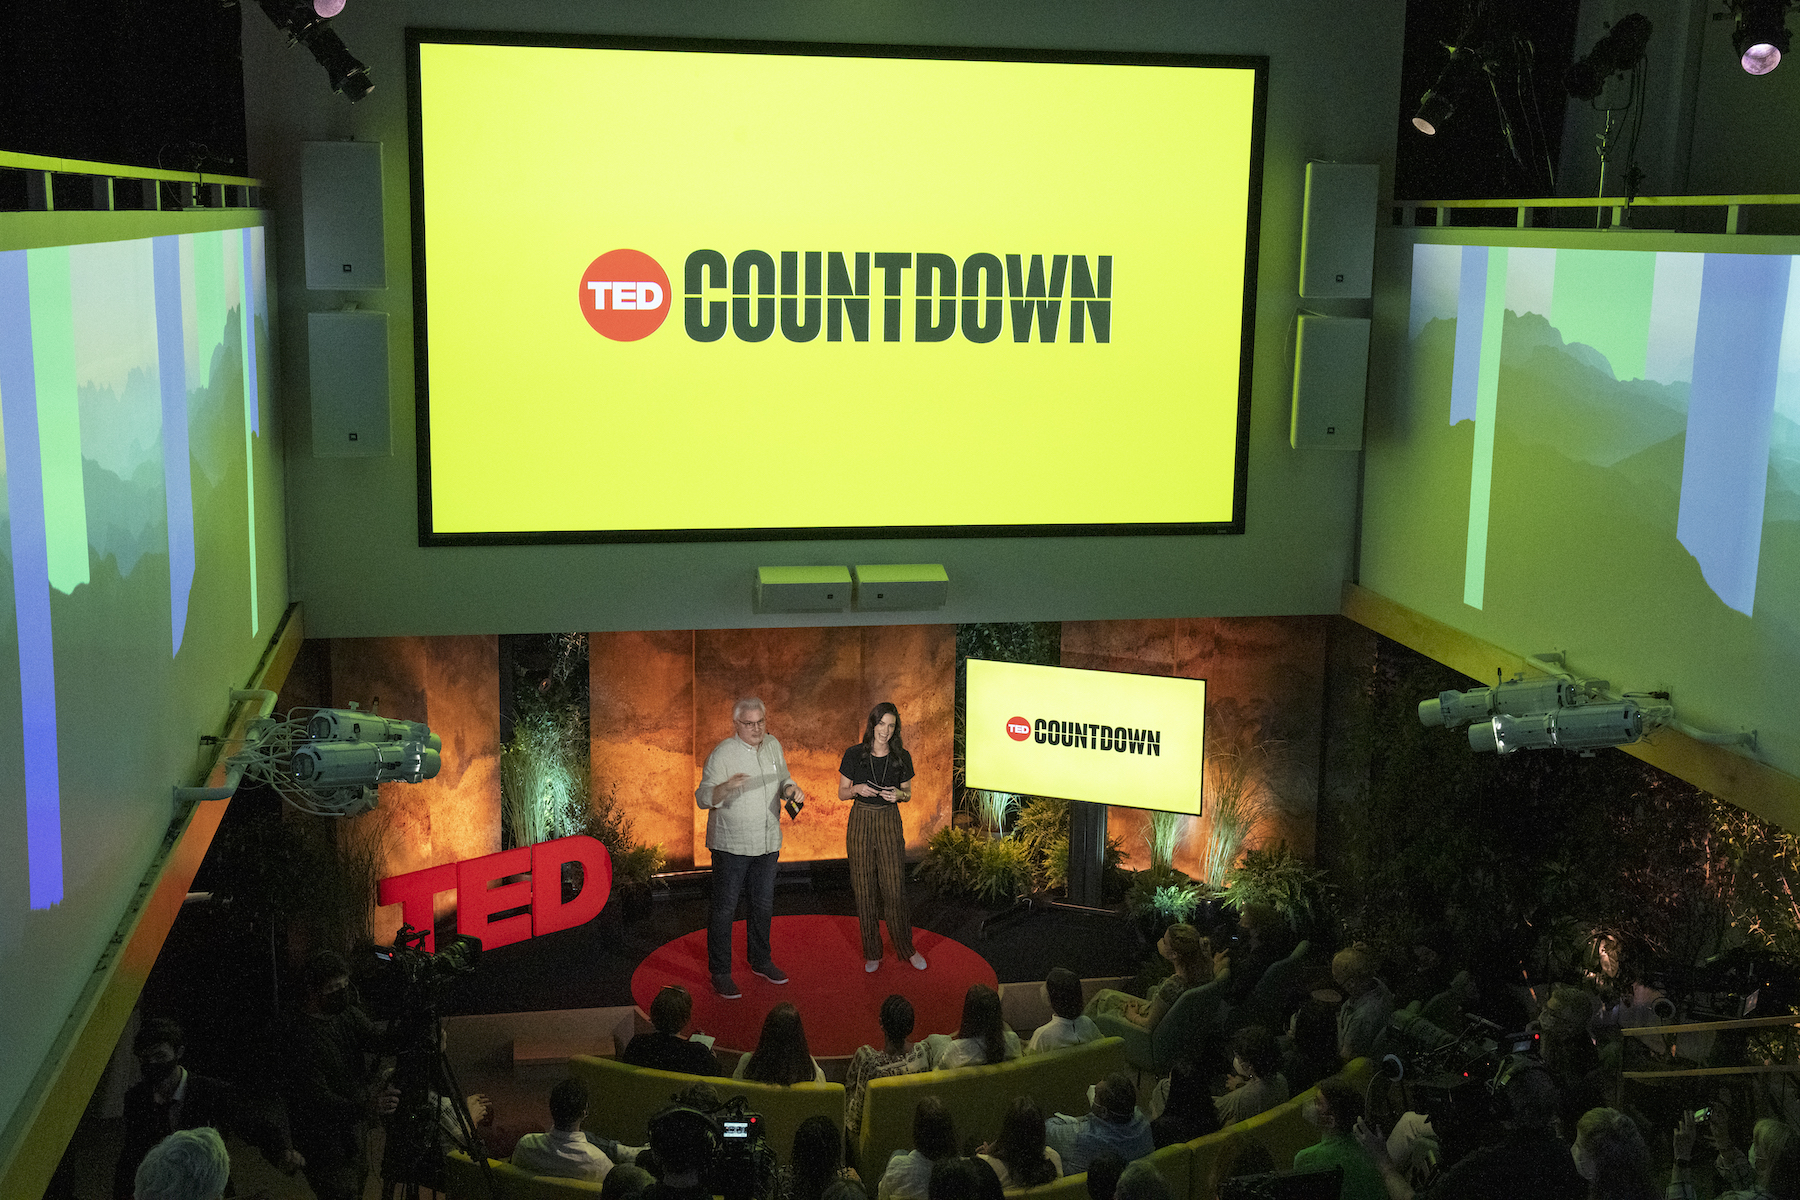 What’s next for climate action? The talks from the TED Countdown New
York Session 2022